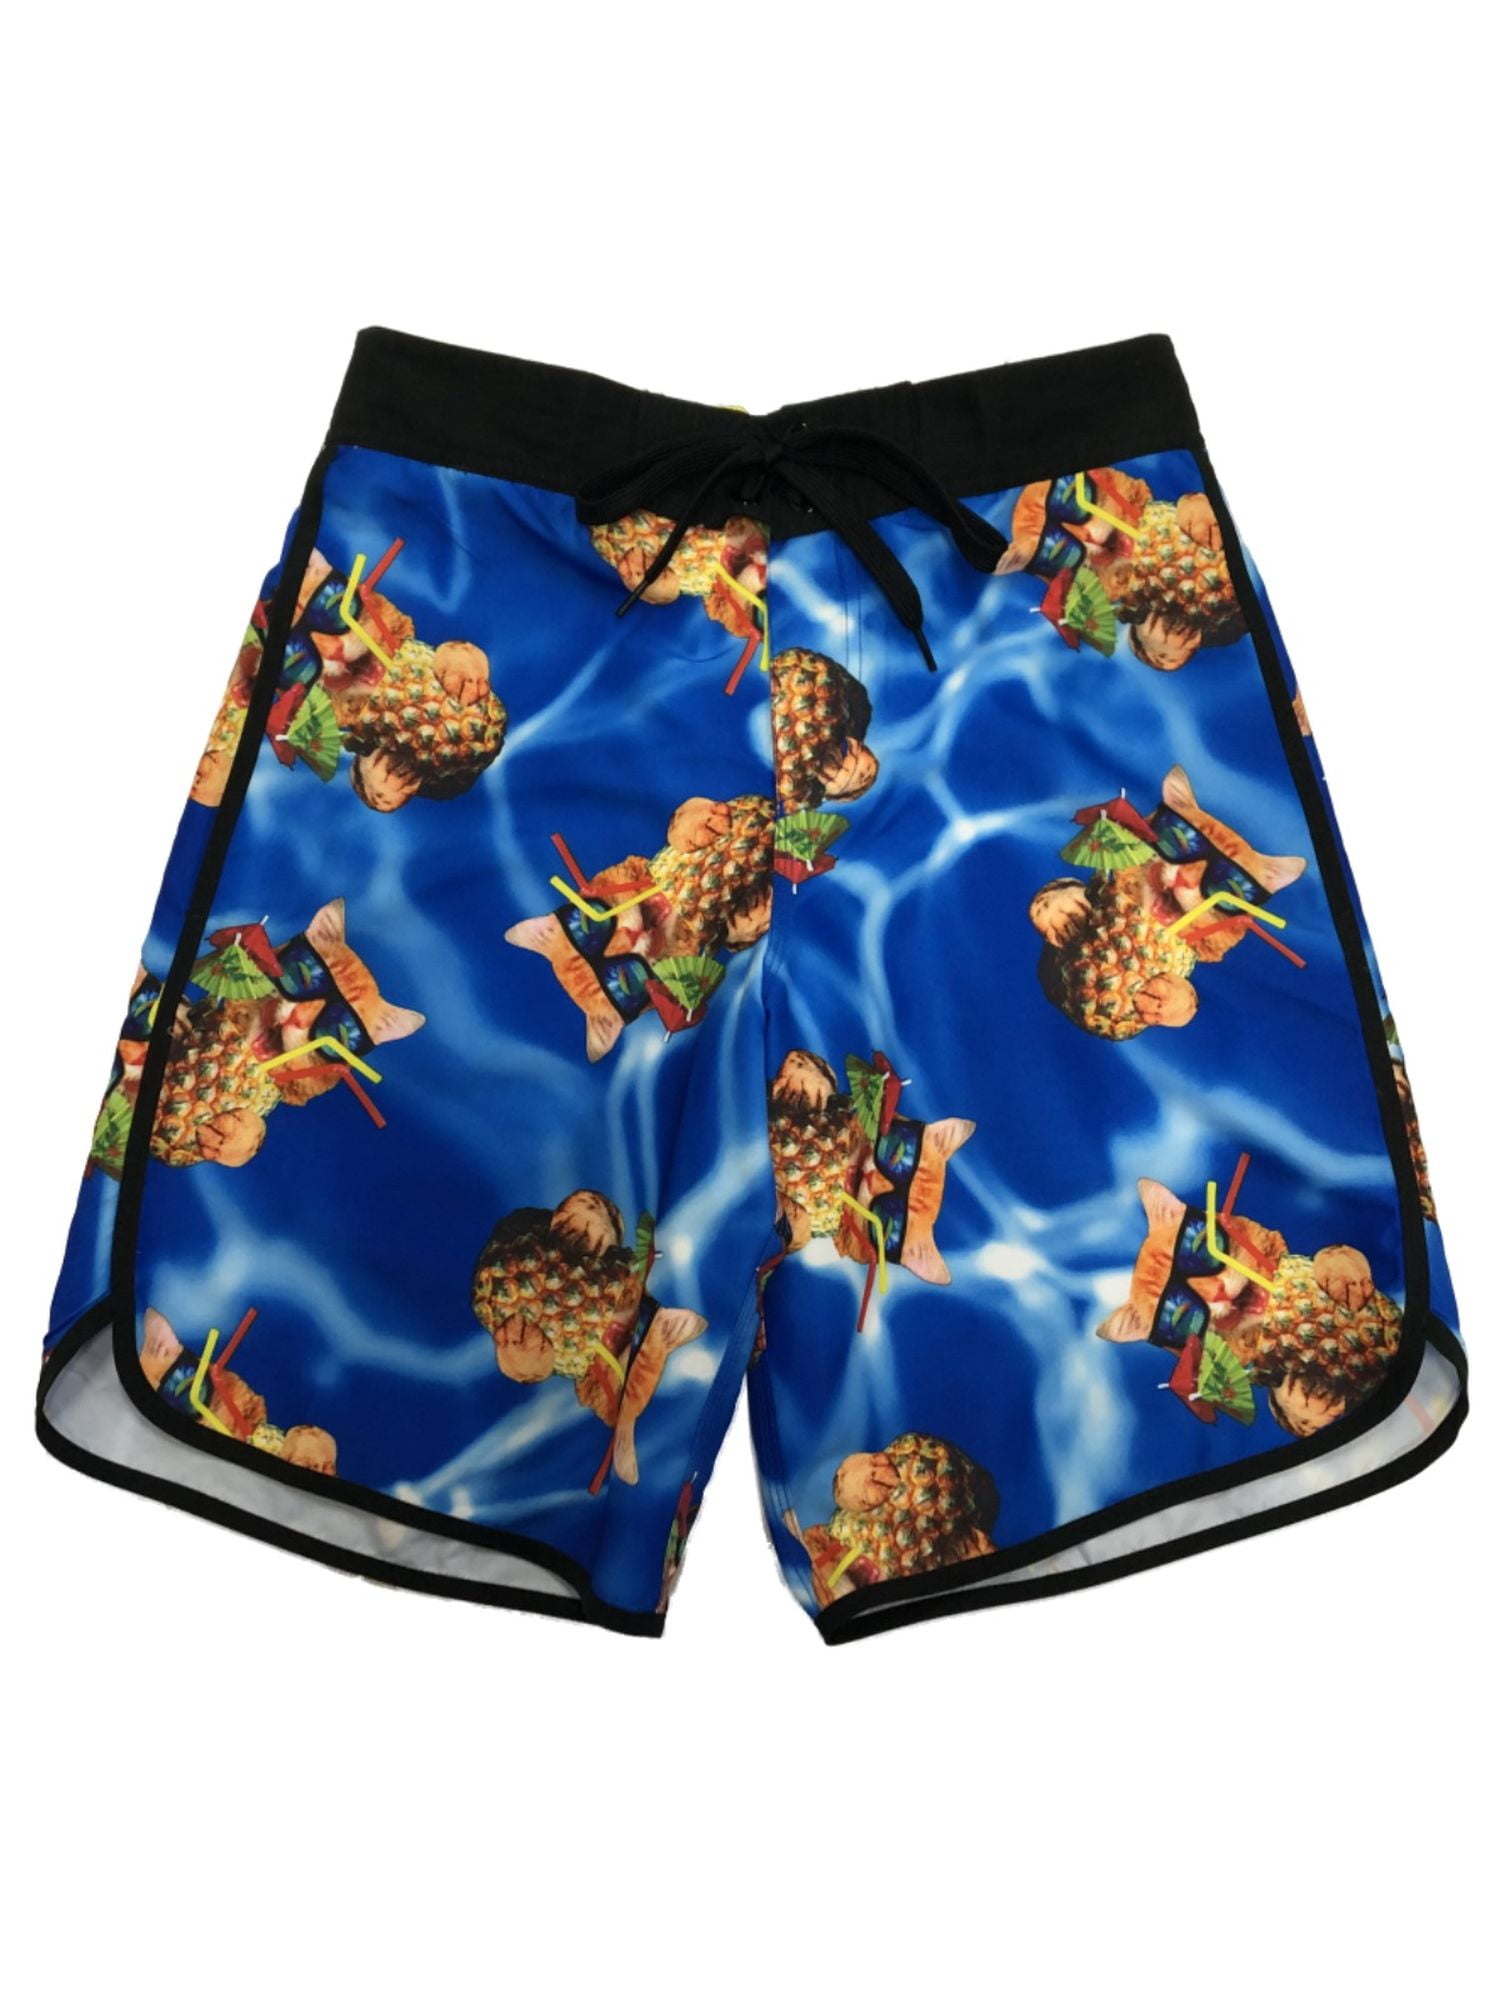 Mens Swim Trunks Kitty Cat Printed Beach Board Shorts with Pockets Cool Novelty Bathing Suits for Teen Boys 